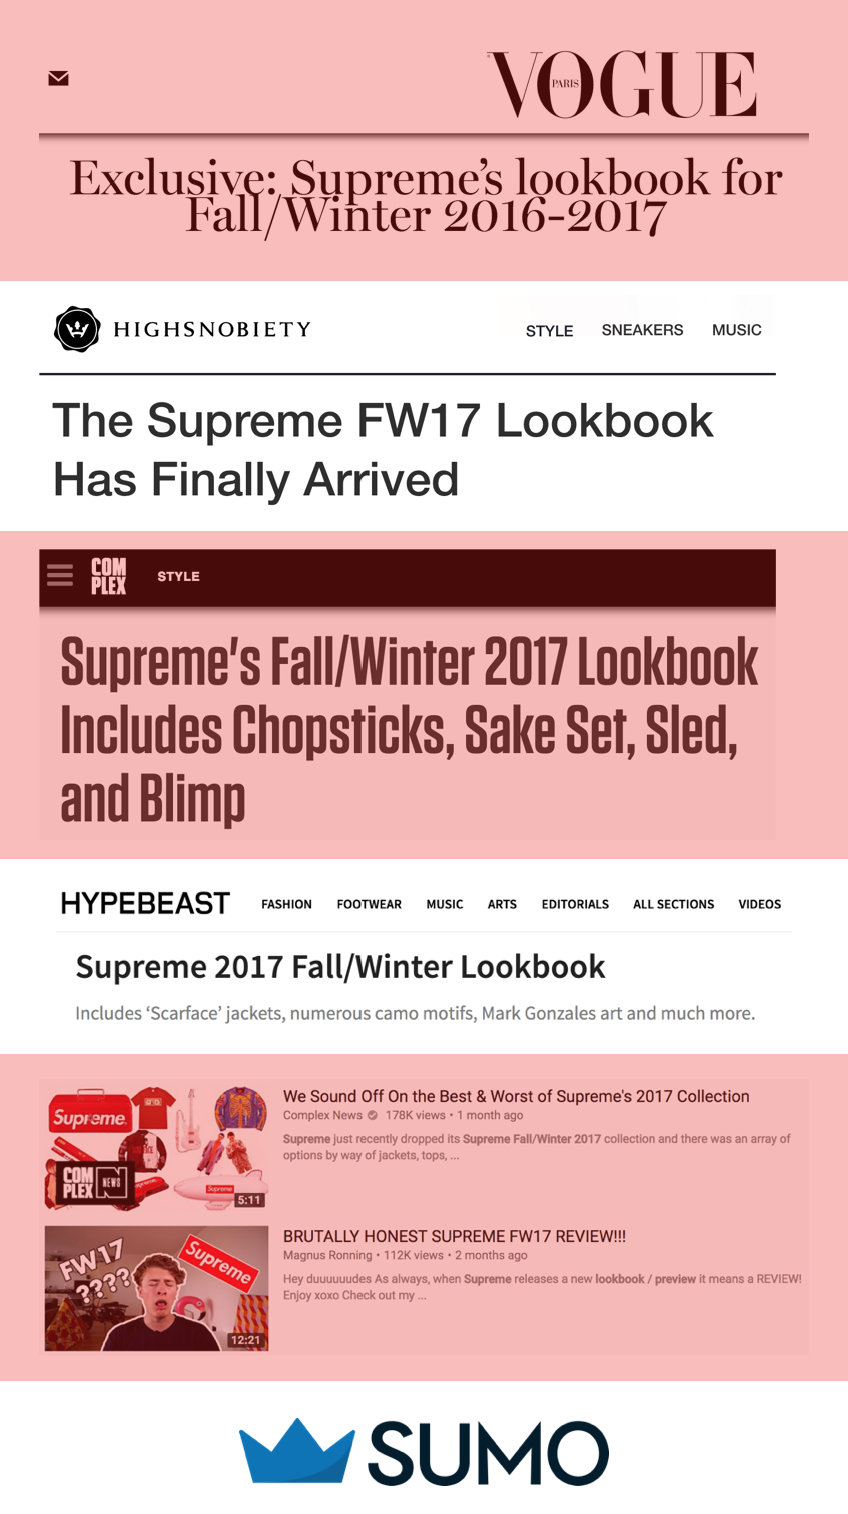 Screenshot showing news outlets covering the new Supreme lookbook